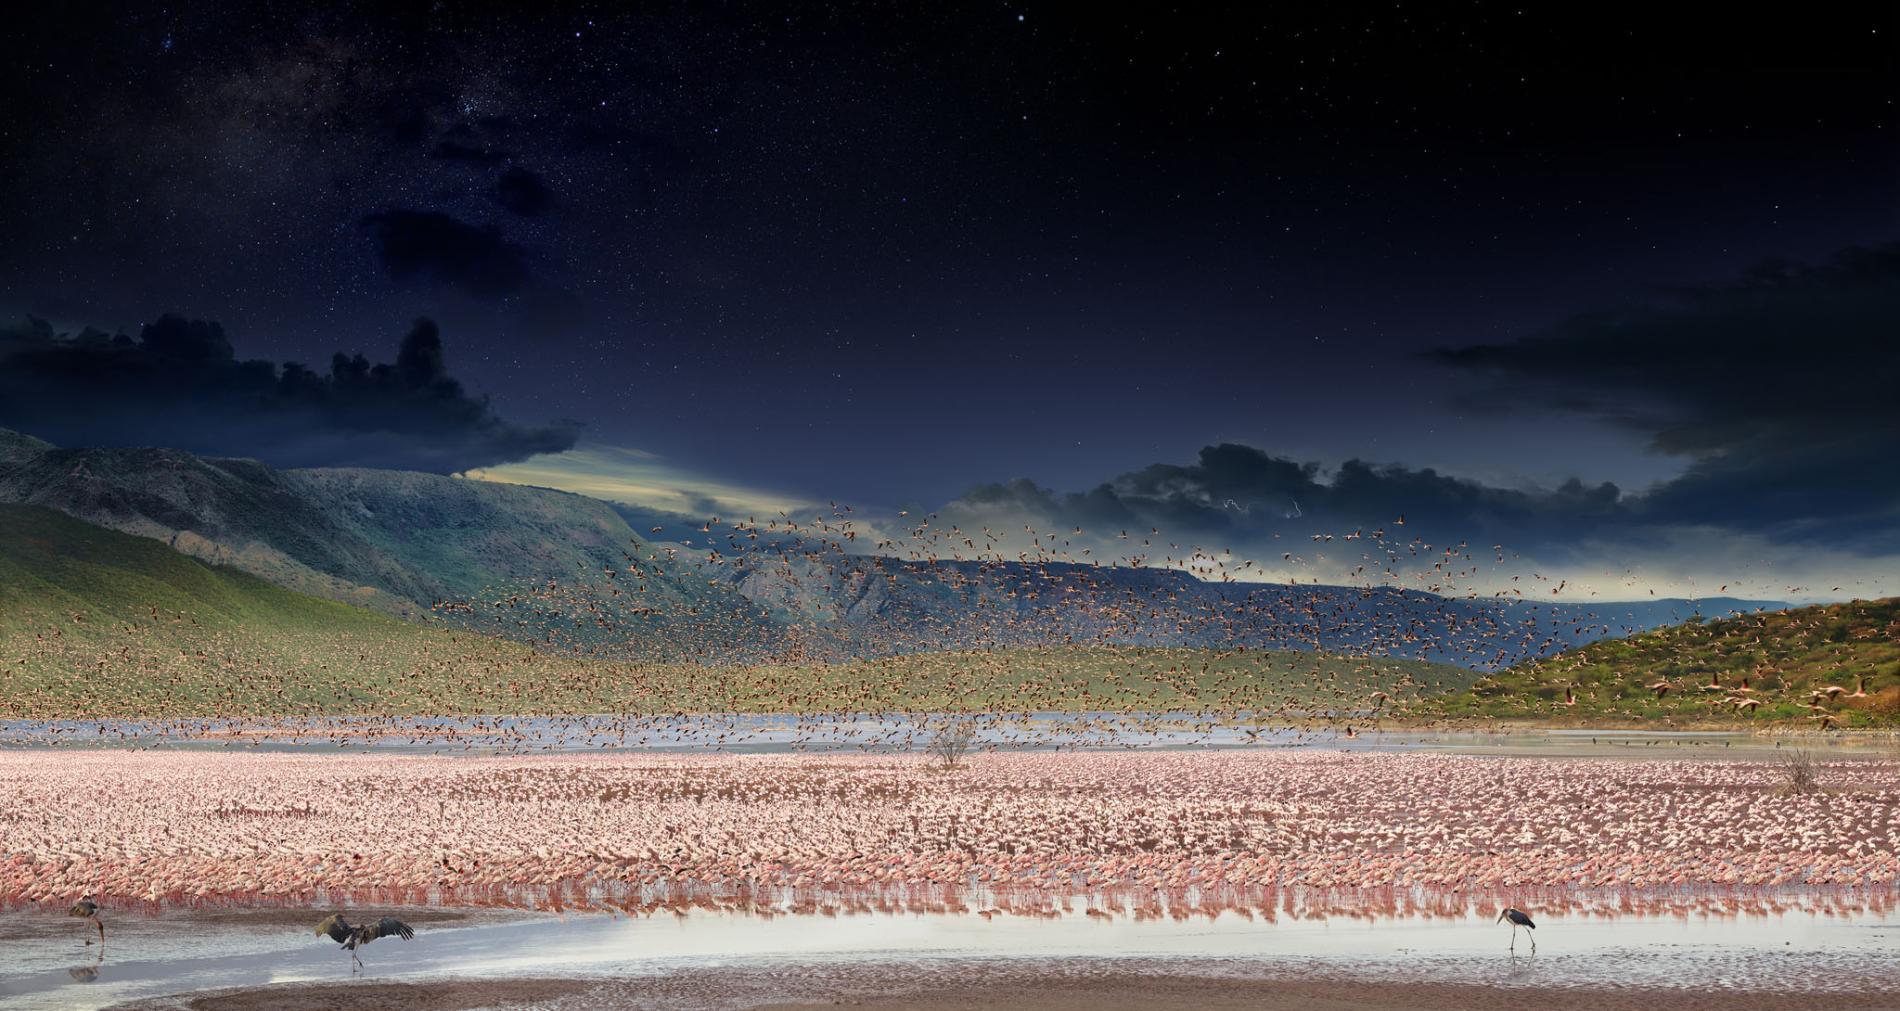 Stephen Wilkes for National Geographic — "The Epic Journeys of Migratory Birds"